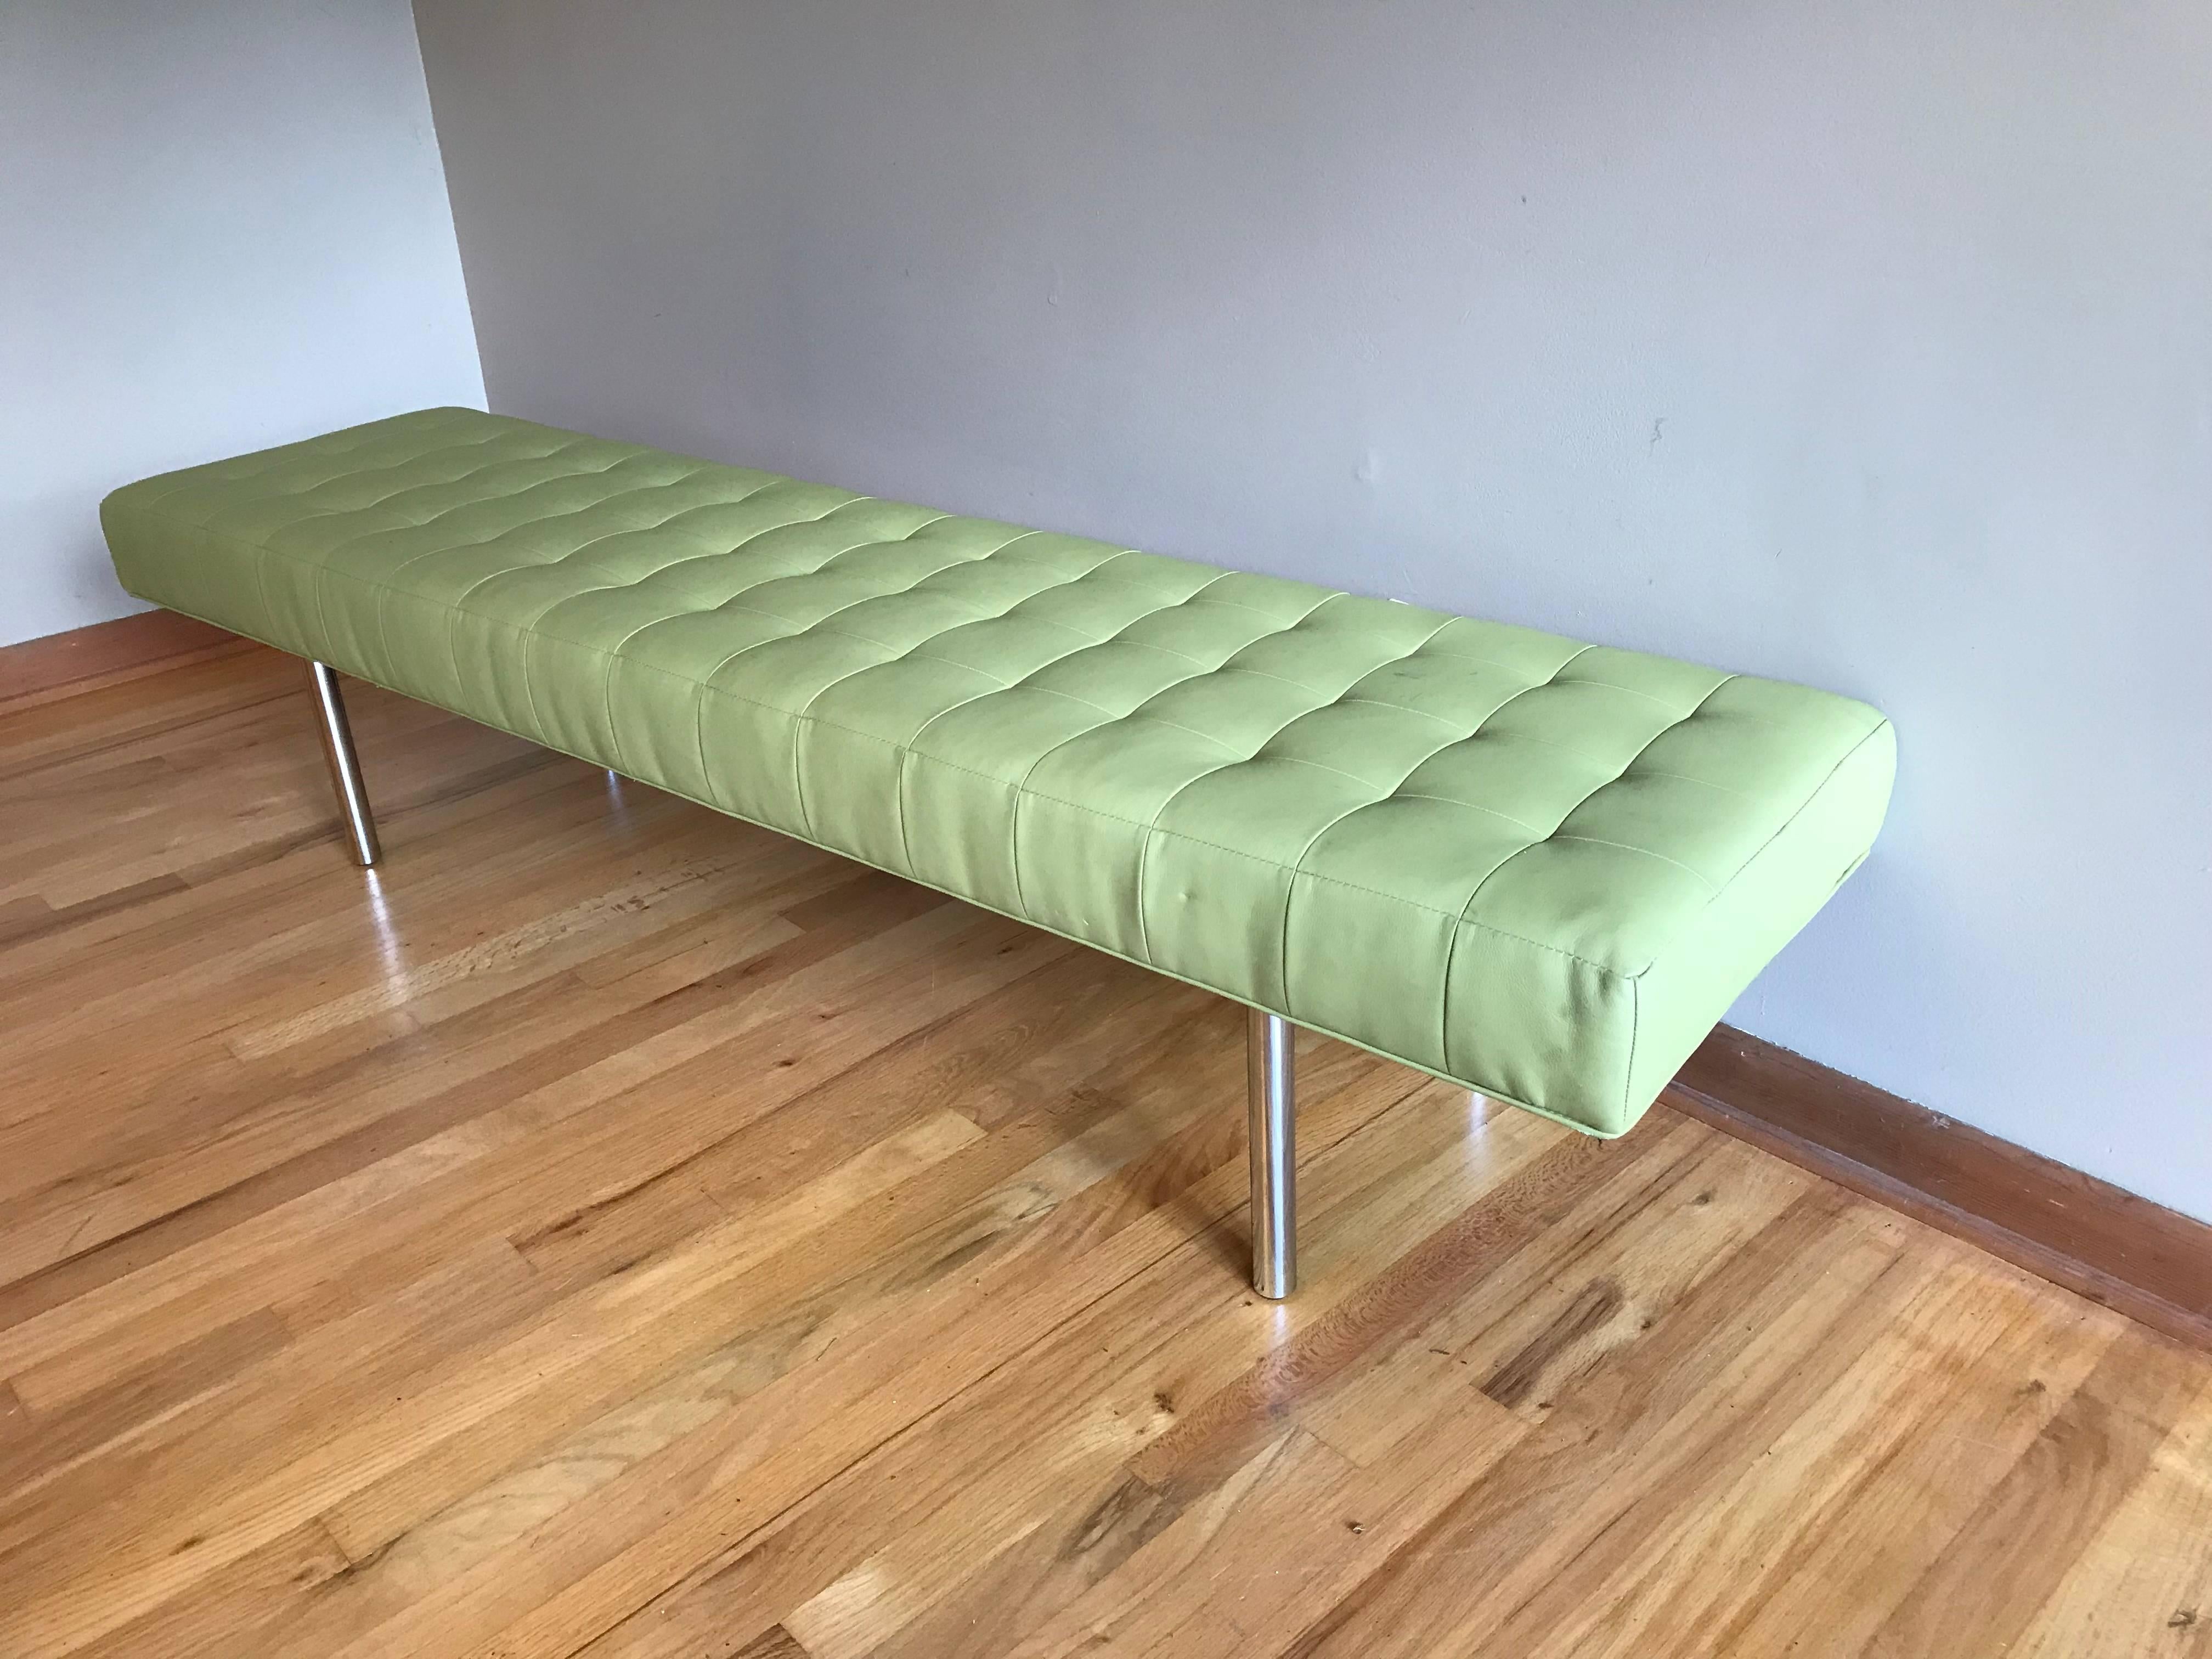 A long pale green tufted leather bench with tubular chrome legs.